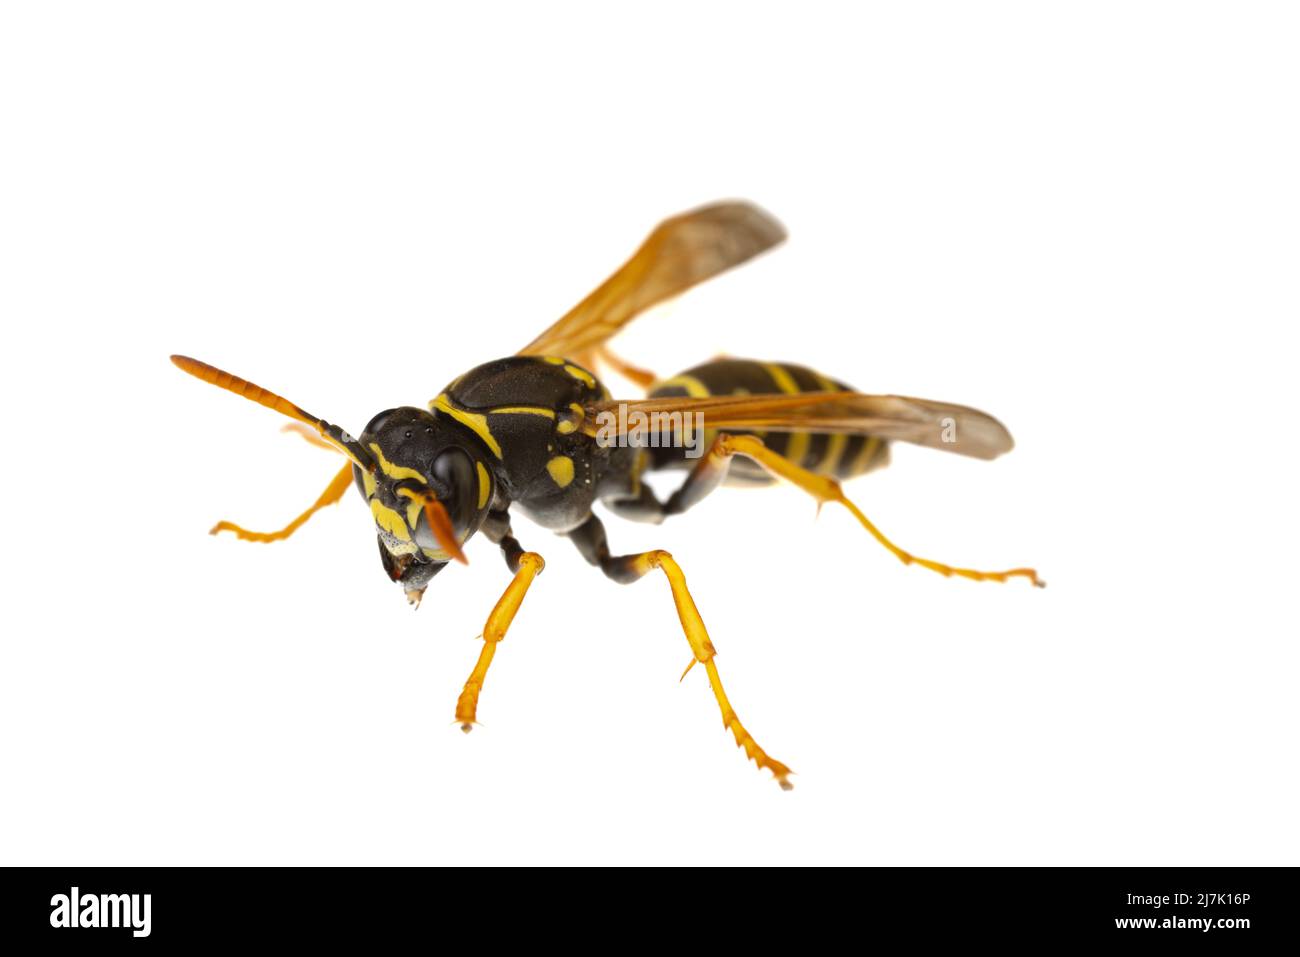 insects of europe - wasps: macro of paper wasp ( Polistes nimpha )  isolated on white background - diagonal view Stock Photo